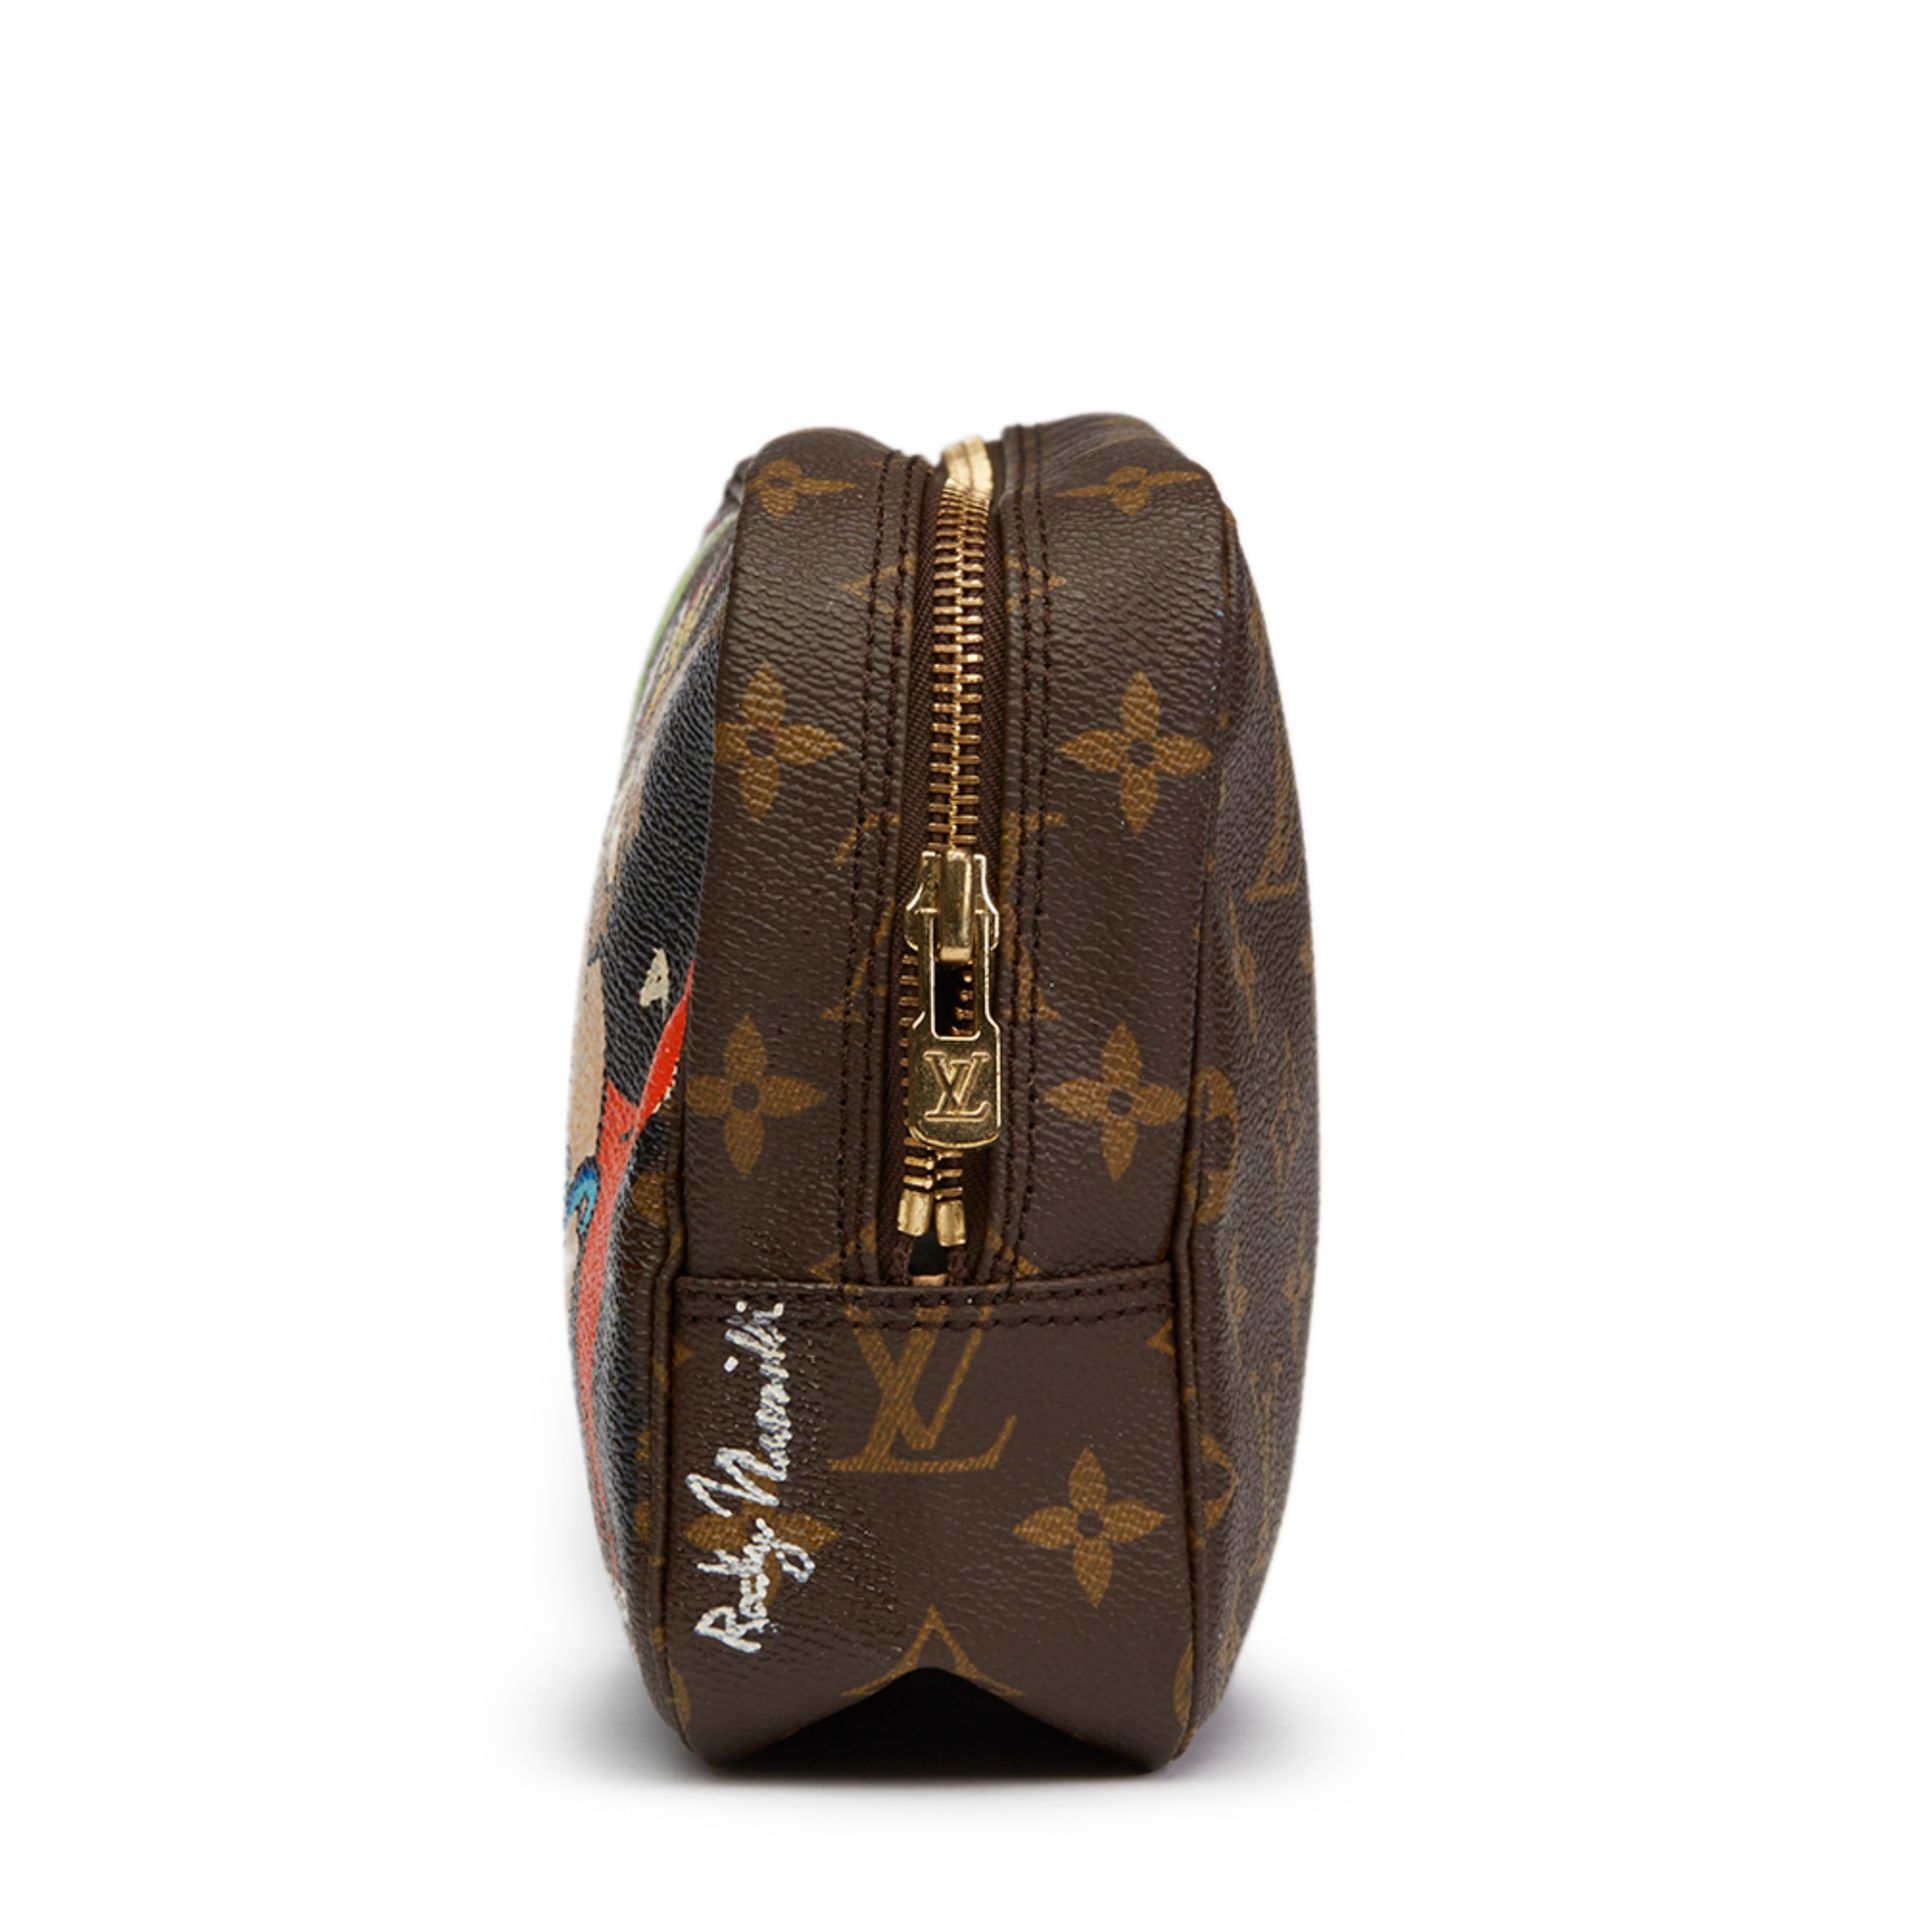 Louis Vuitton Hand-painted 'Sick of it all' X Year Zero London Toiletry Pouch - Image 5 of 11